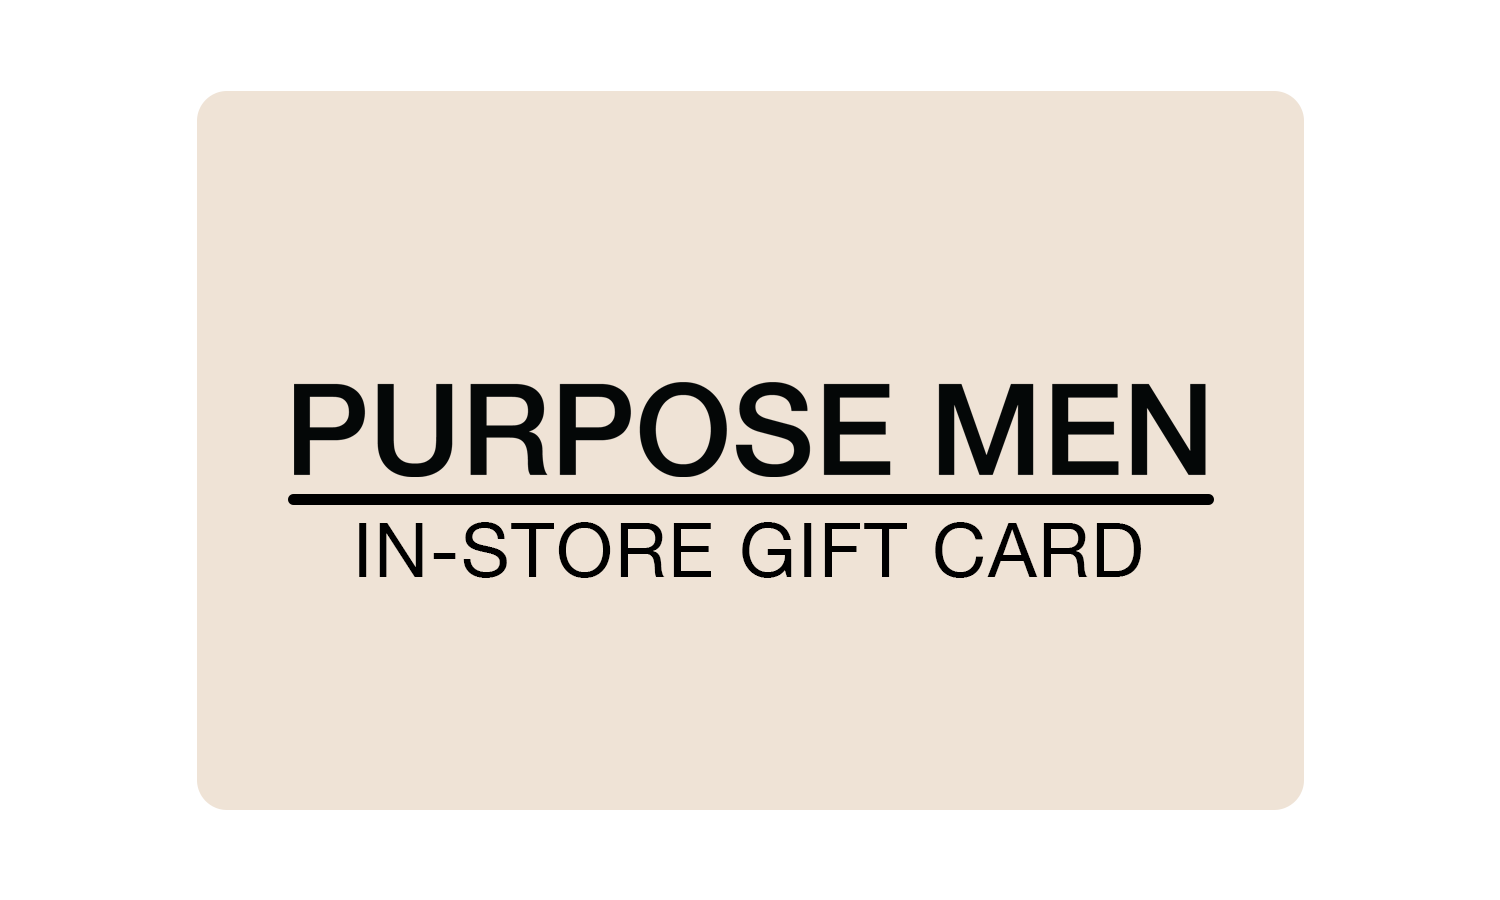 Purpose Men In-Store Only Gift Card